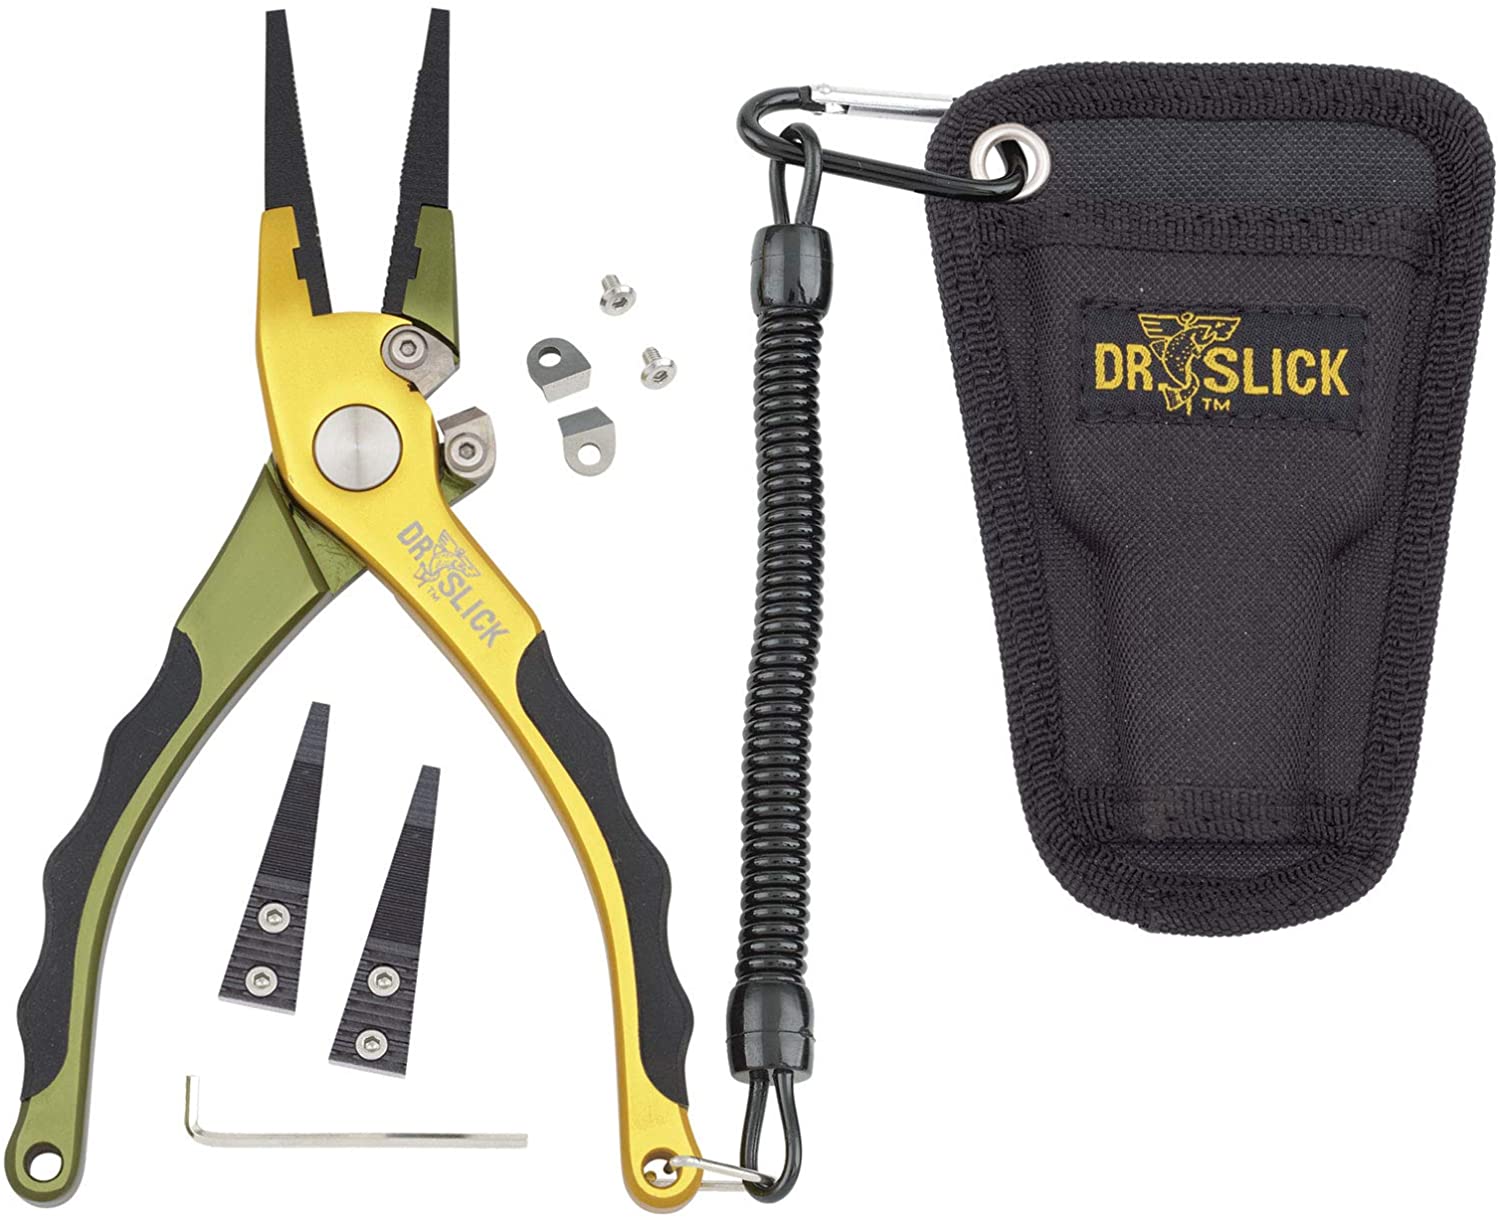 Dr Slick Squall 7.5" Pliers With Cutters